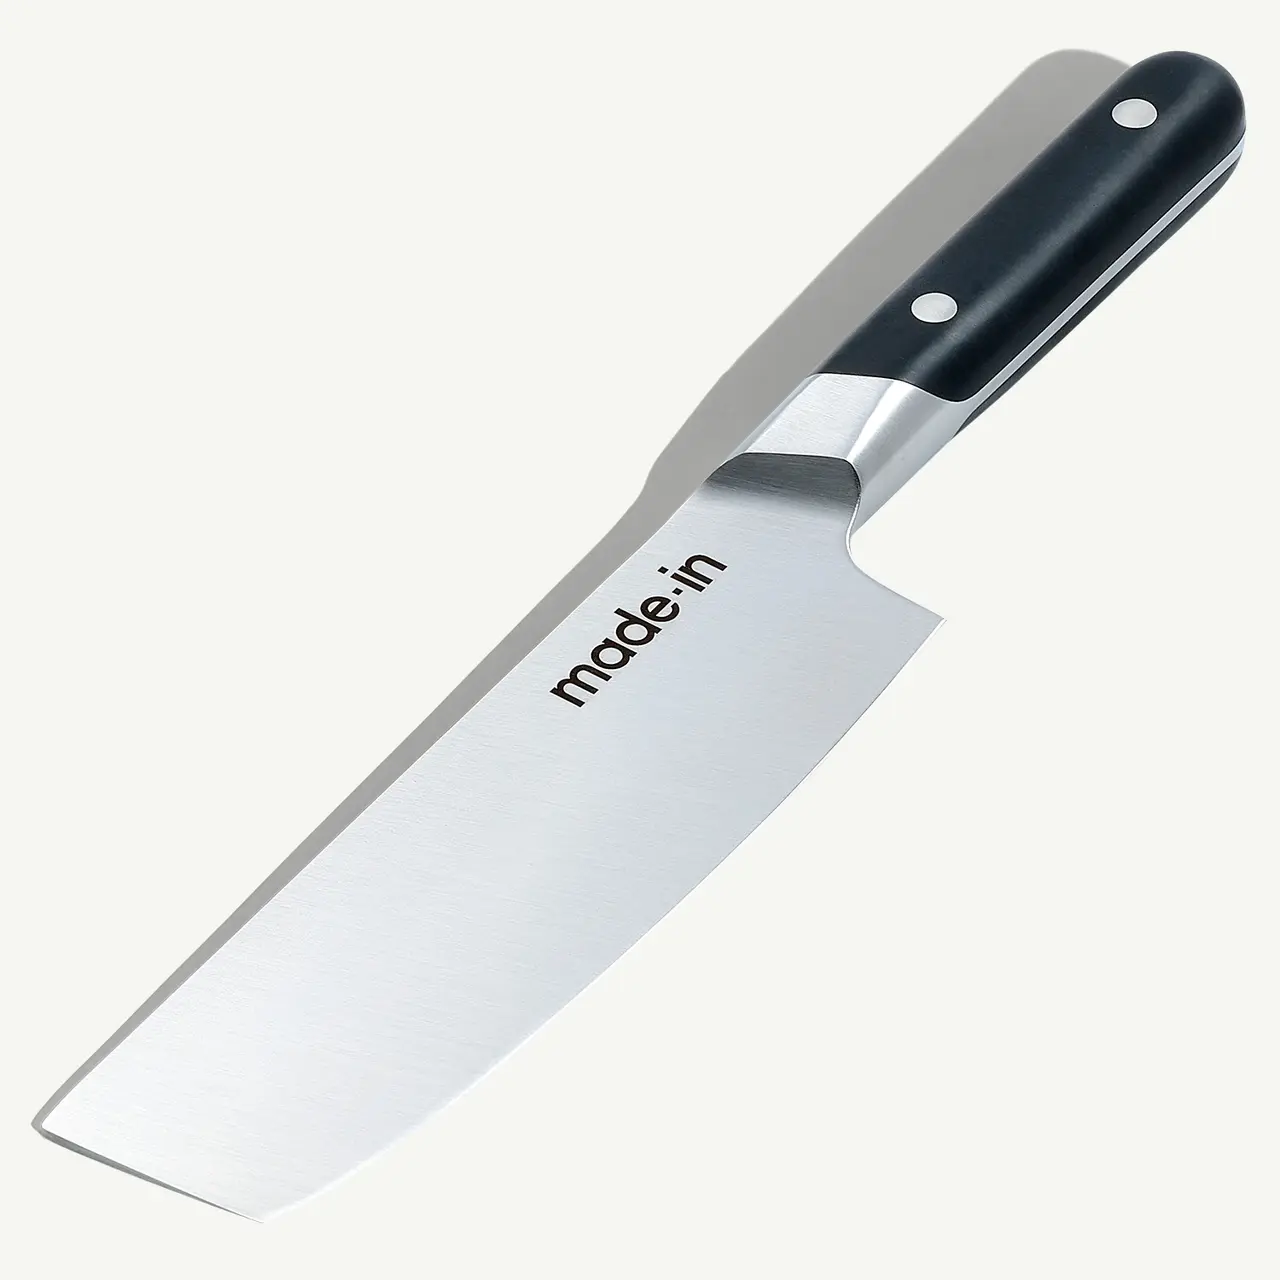 A stainless steel kitchen knife with a black handle and the brand "made.in" etched on the blade.